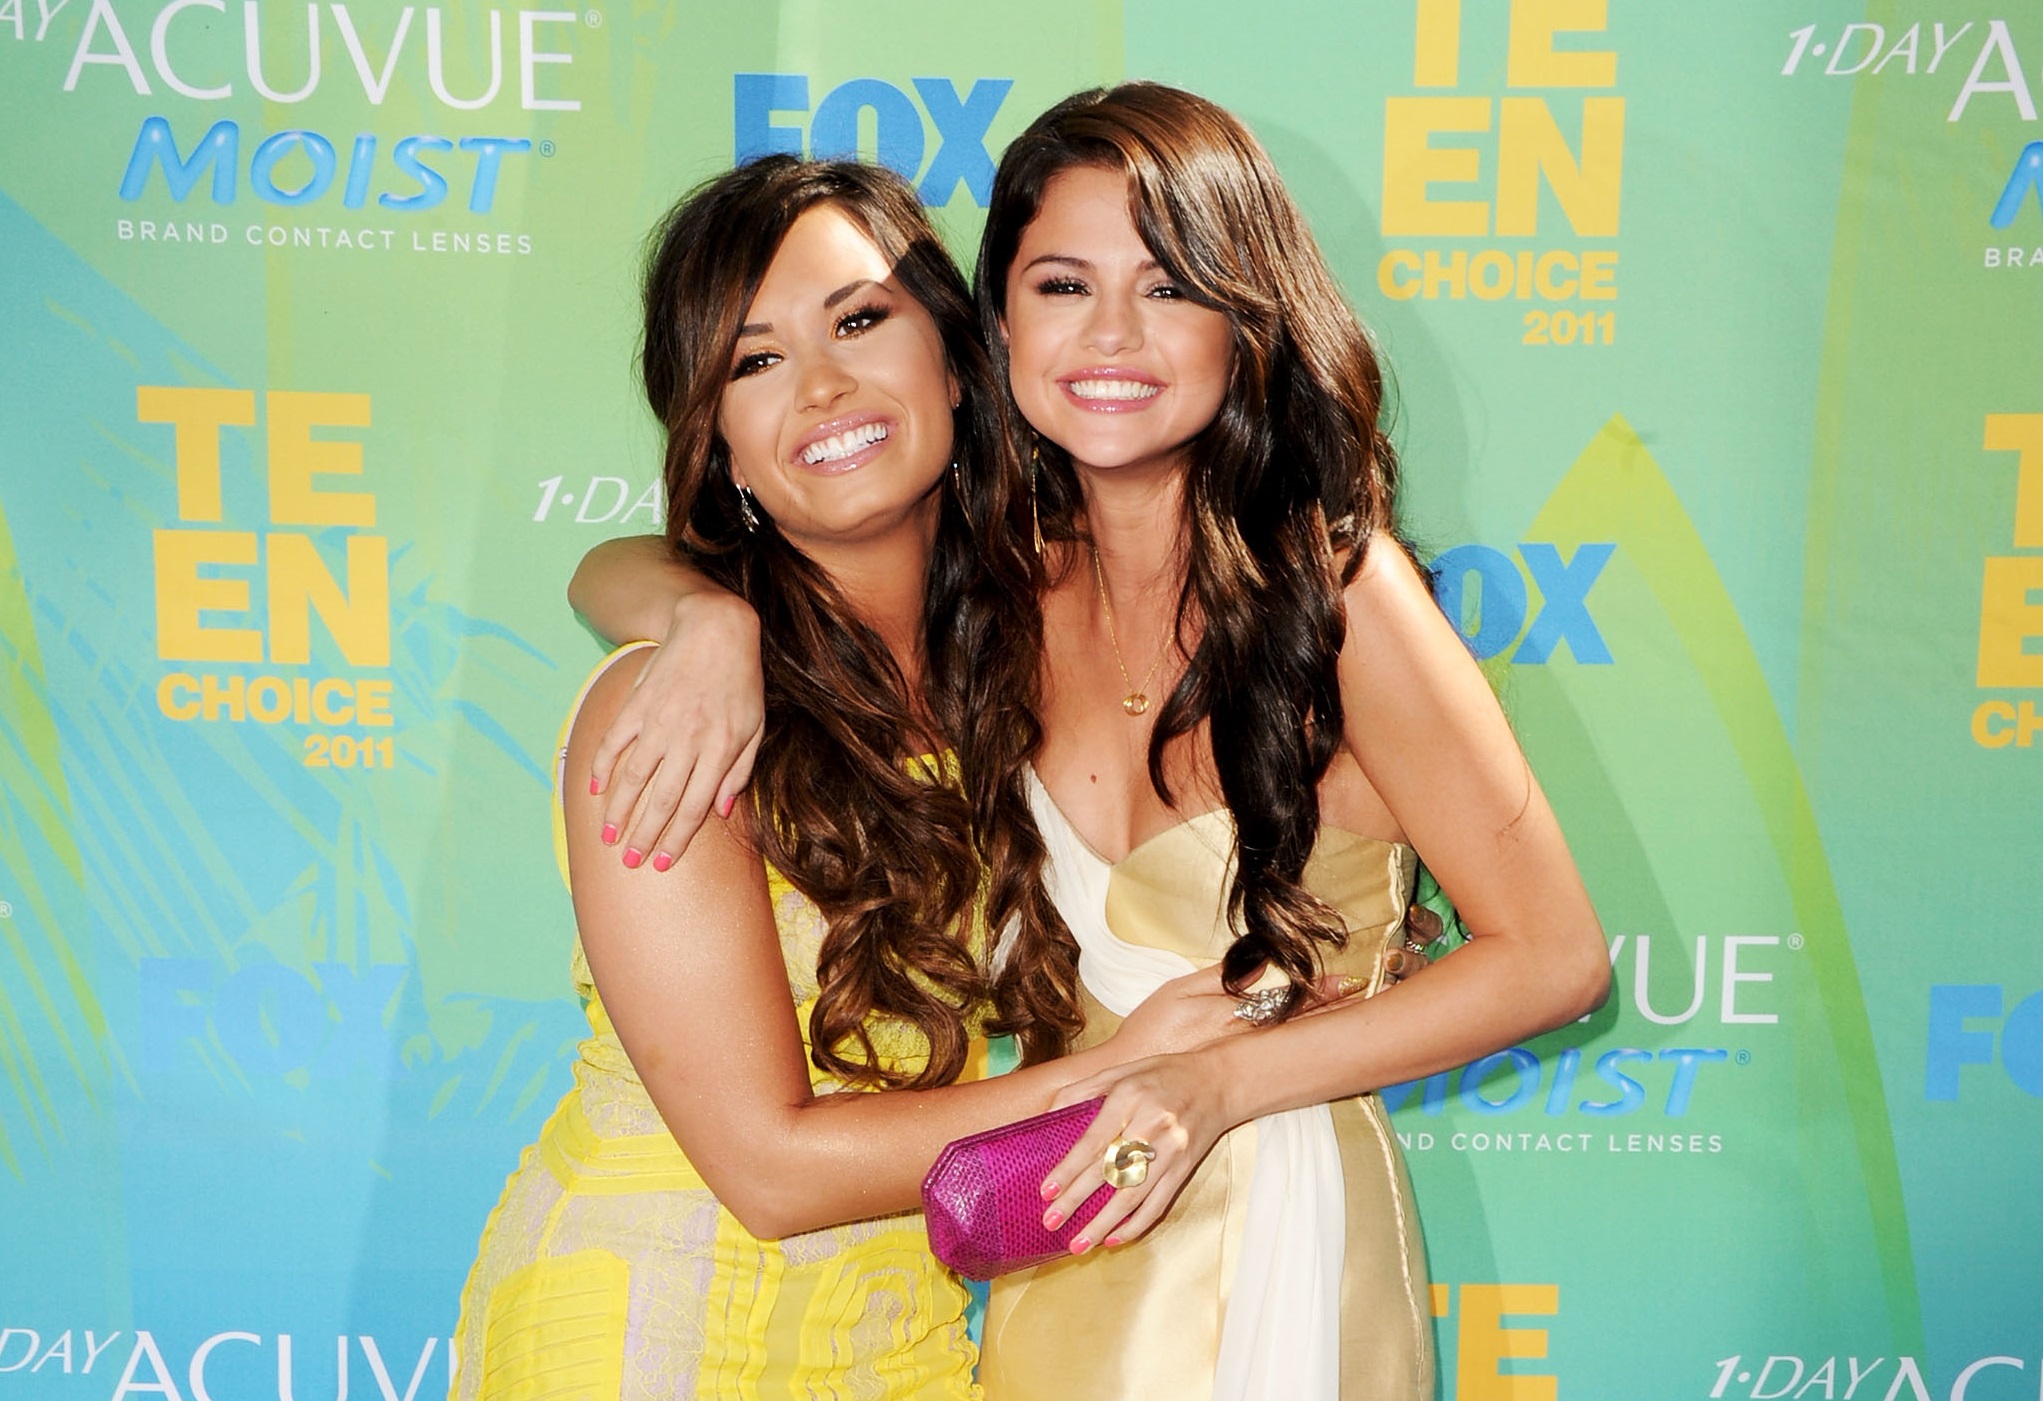 Demi Lovato (L) and Selena Gomez arrive at the 2011 Teen Choice Awards on August 7, 2011 in Universal City, California.